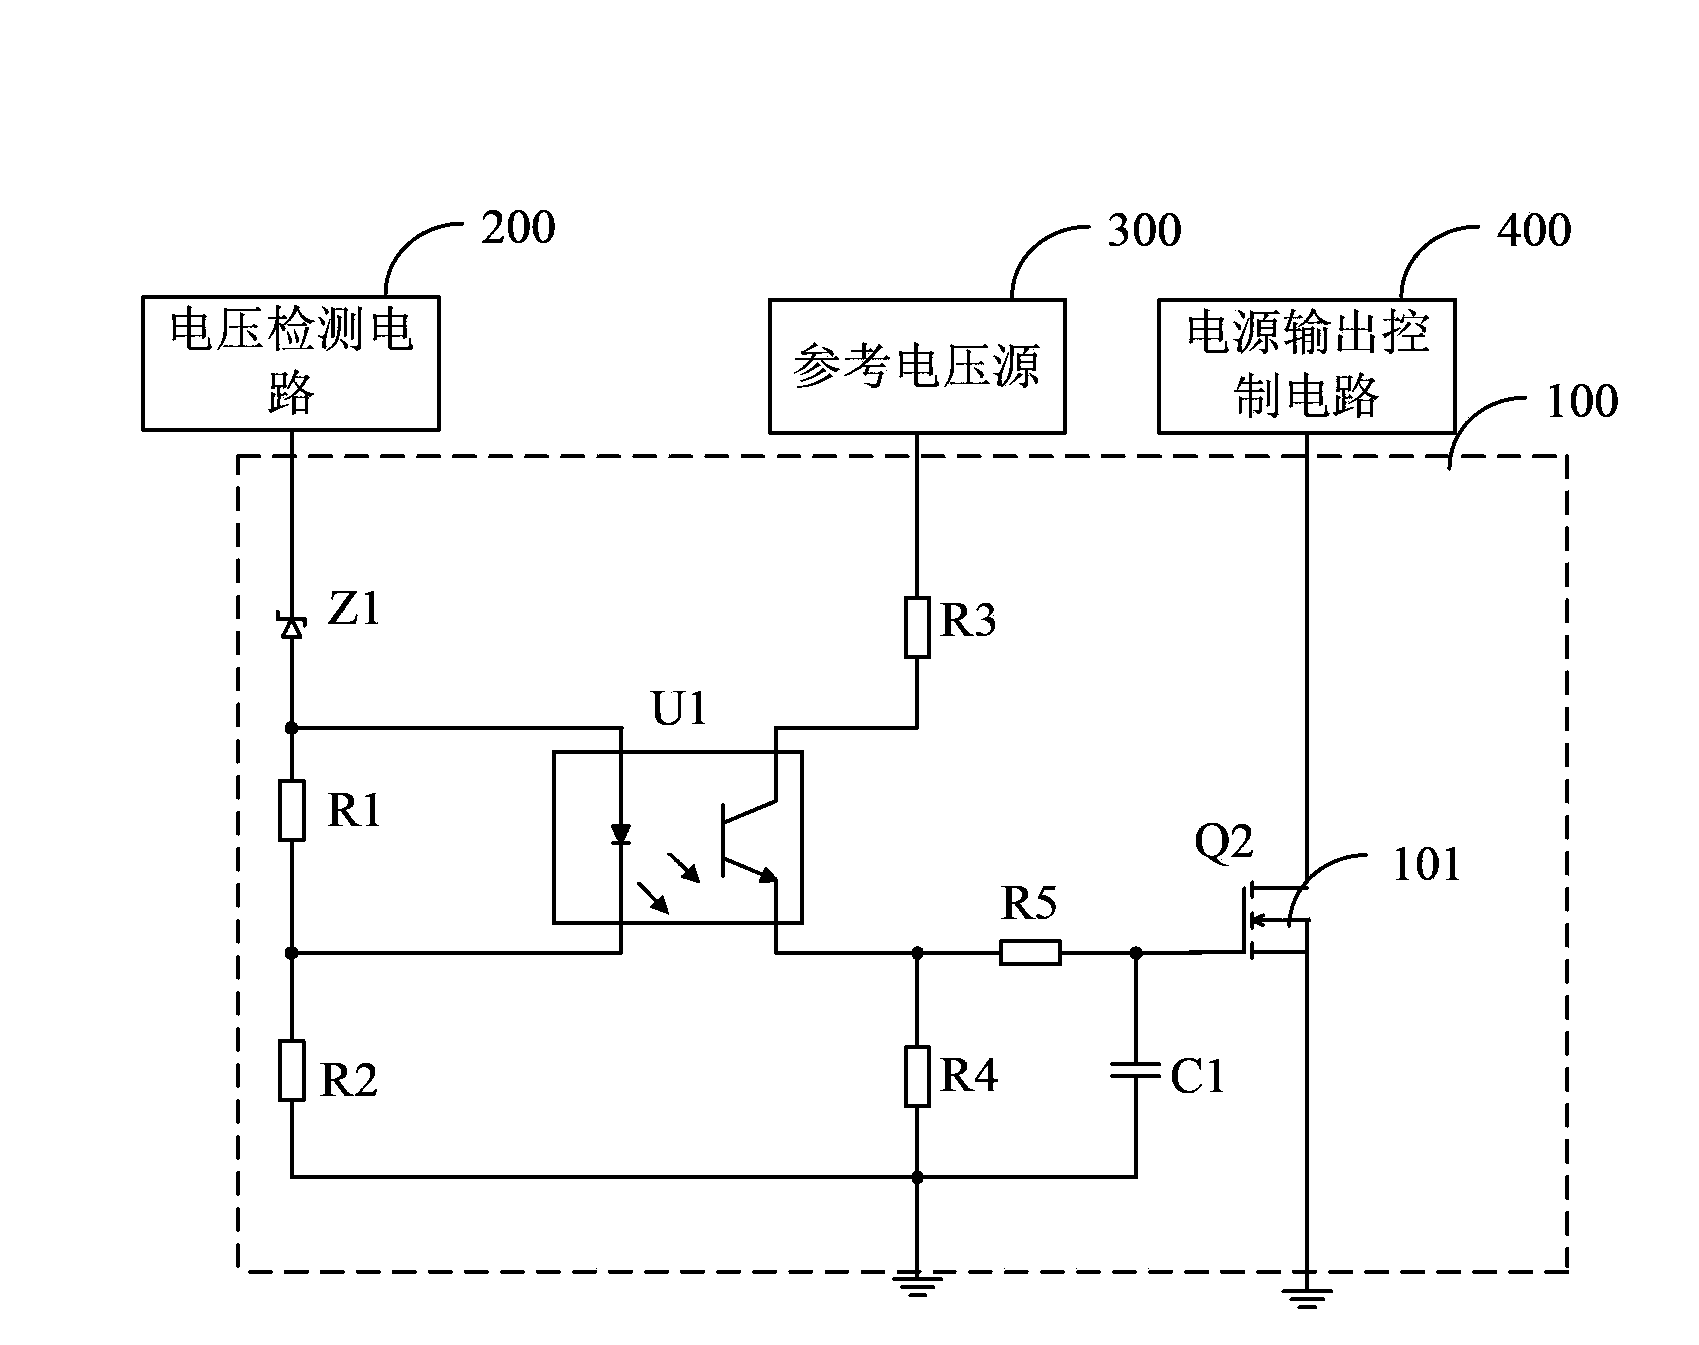 Lamp power output overvoltage protection circuit and lamp